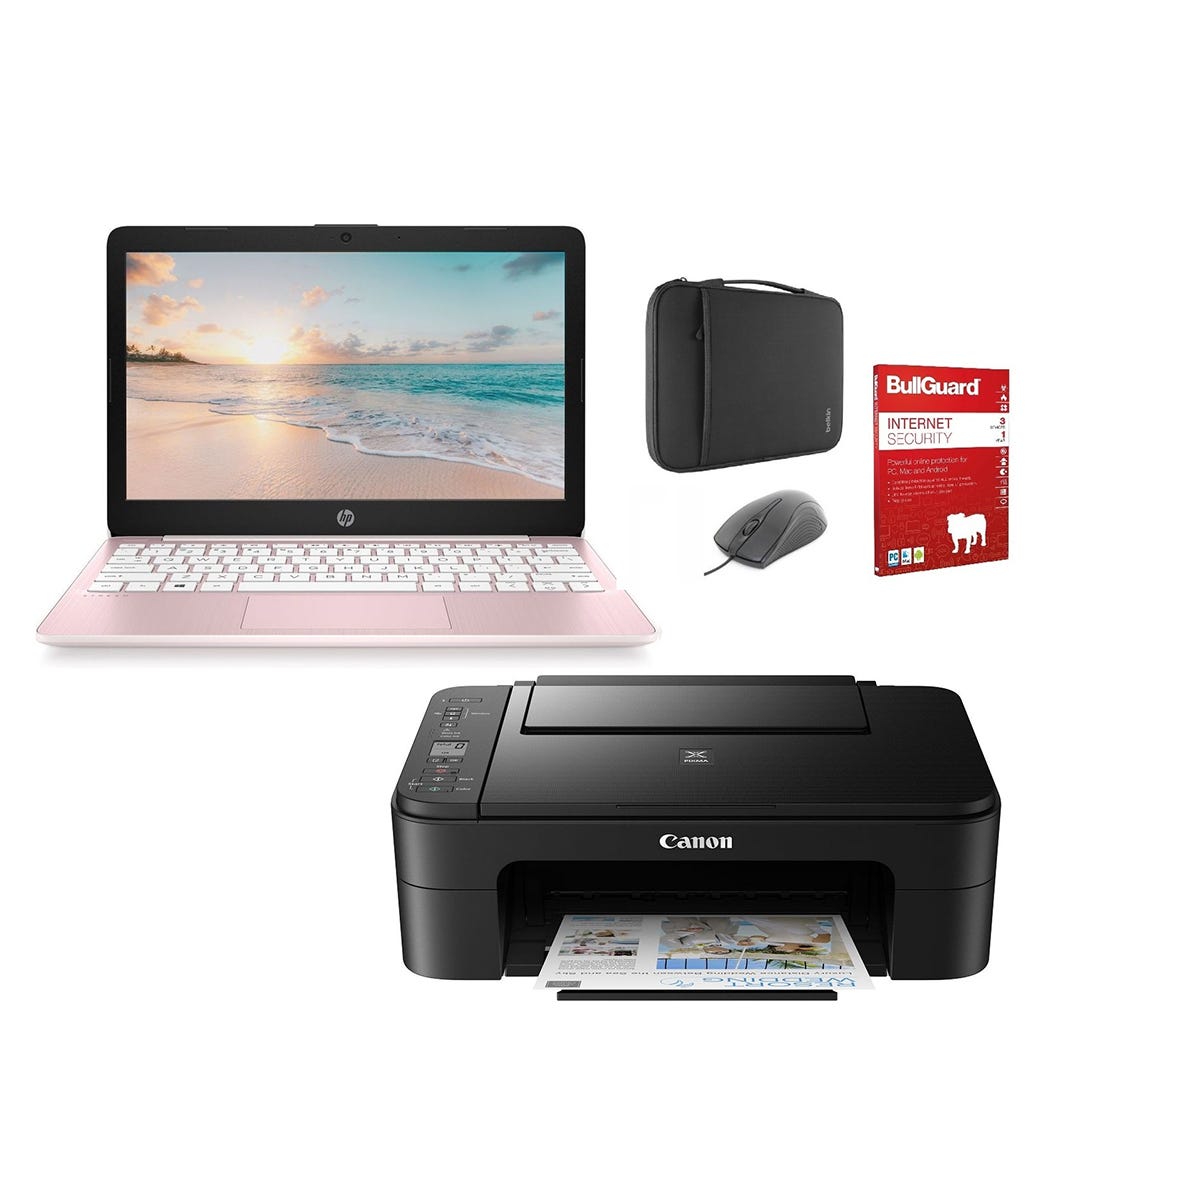 HP Stream Laptop 11-ak0020na & Canon PIXMA TS3350 All-in-One Wireless Inkjet Printer with Microsoft 365 Personal 1 Year Subscription Iincluded - Pink